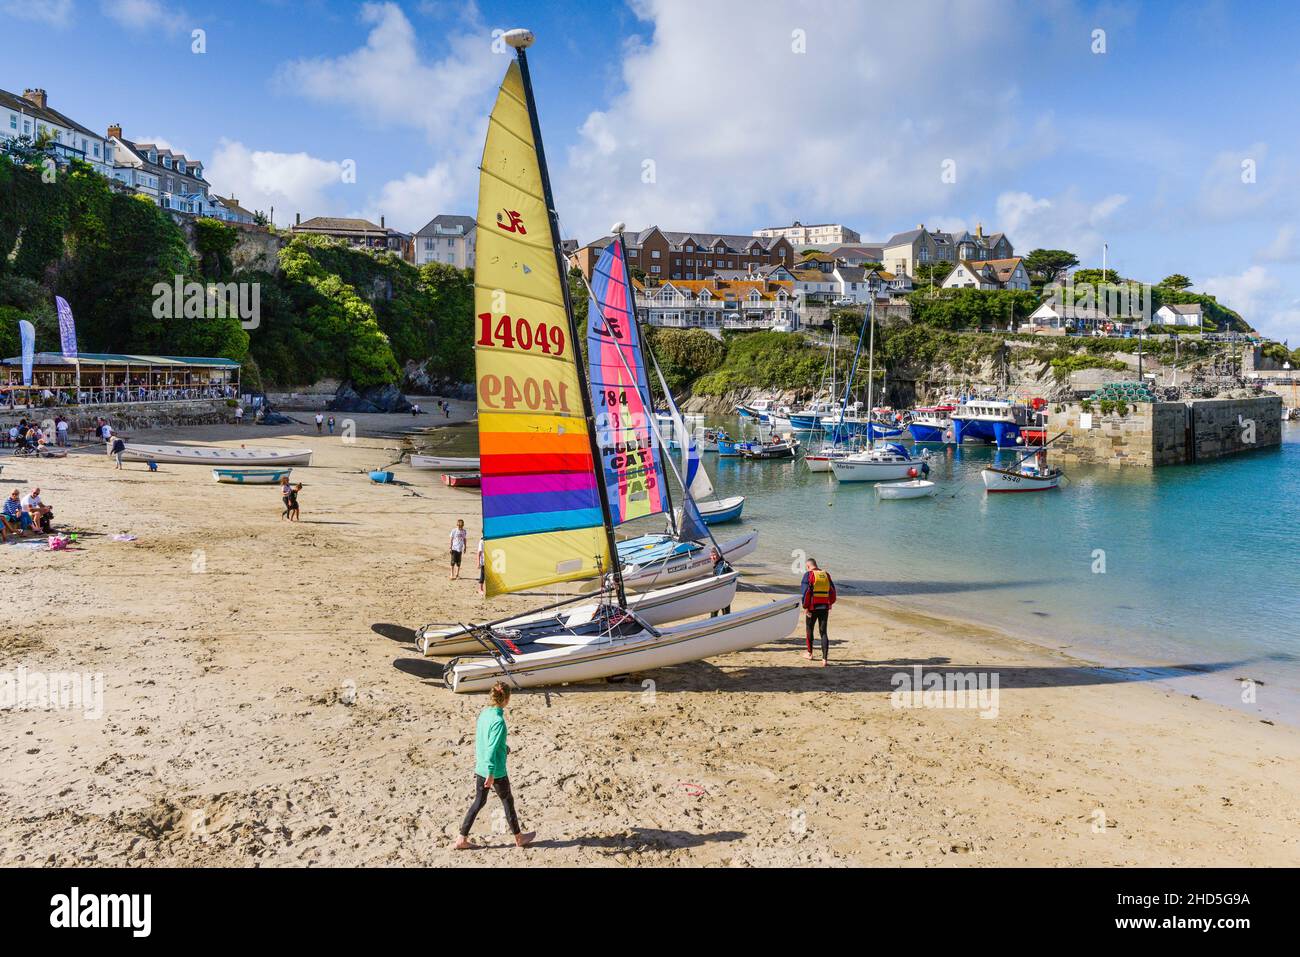 Hobie Cat Catamarans with colourful sails beached in the historic picturesque working Newquay Harbour in Newquay on the North Cornwall coast. Stock Photo